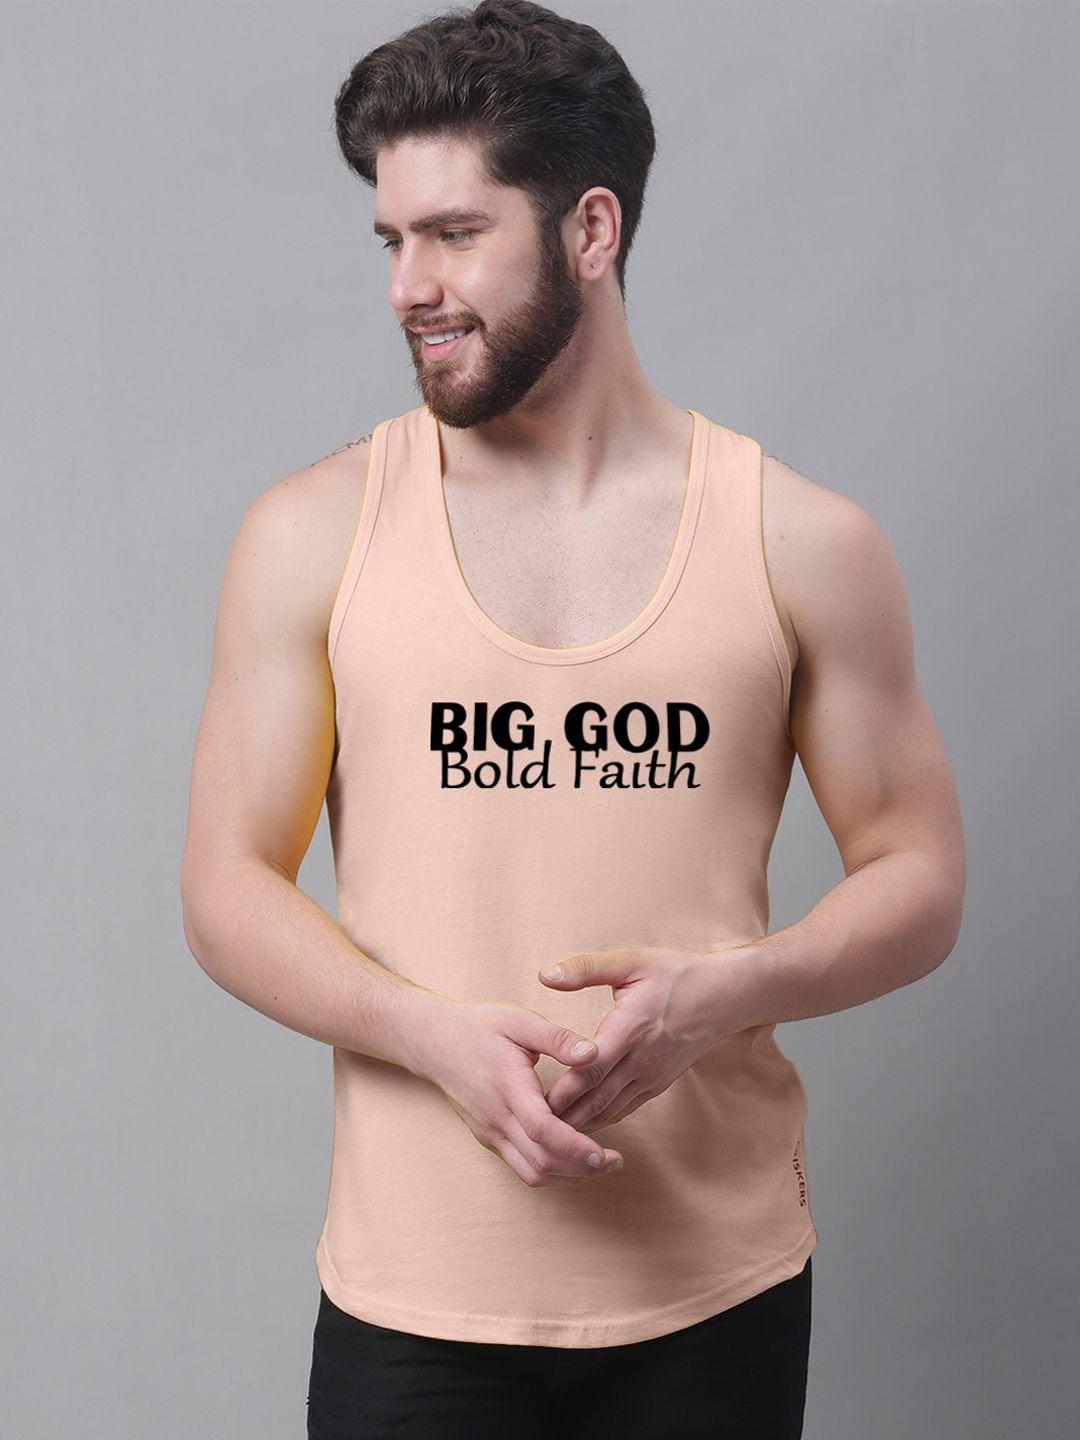 friskers printed pure cotton skin friendly innerwear vests